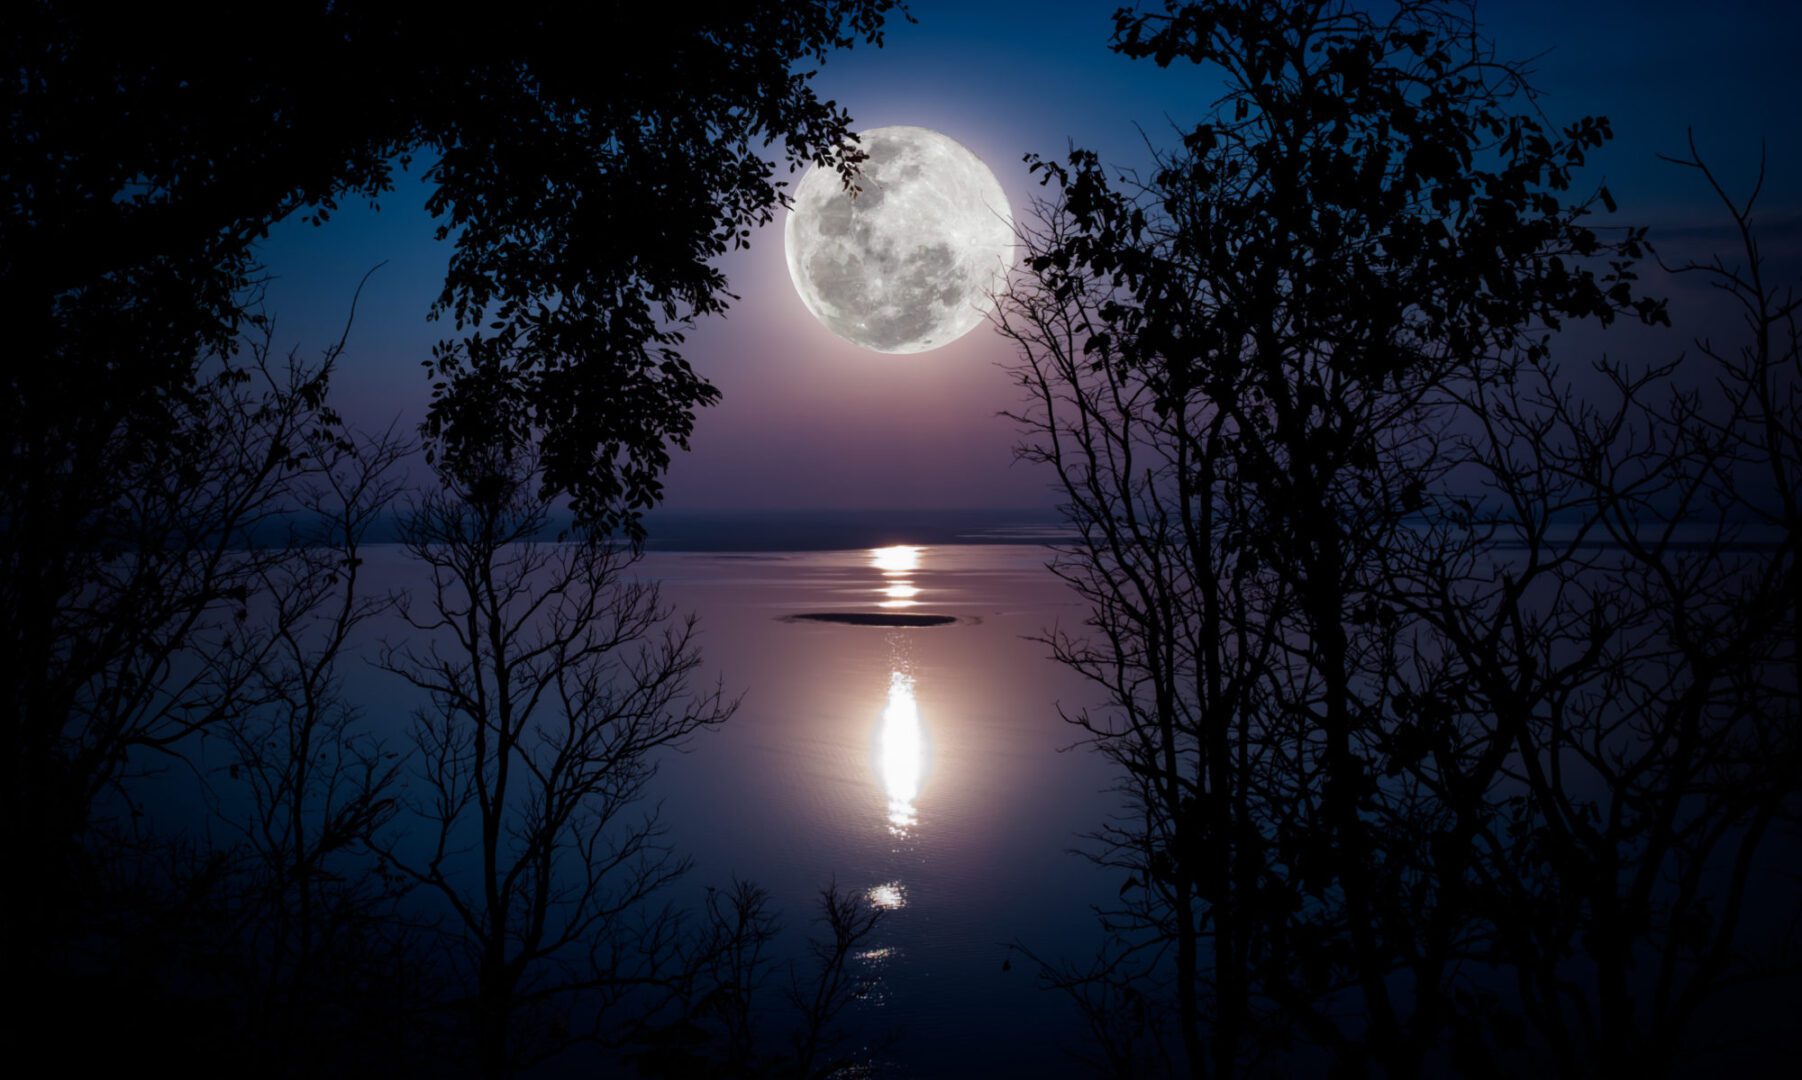 A full moon over the water with trees in front of it.